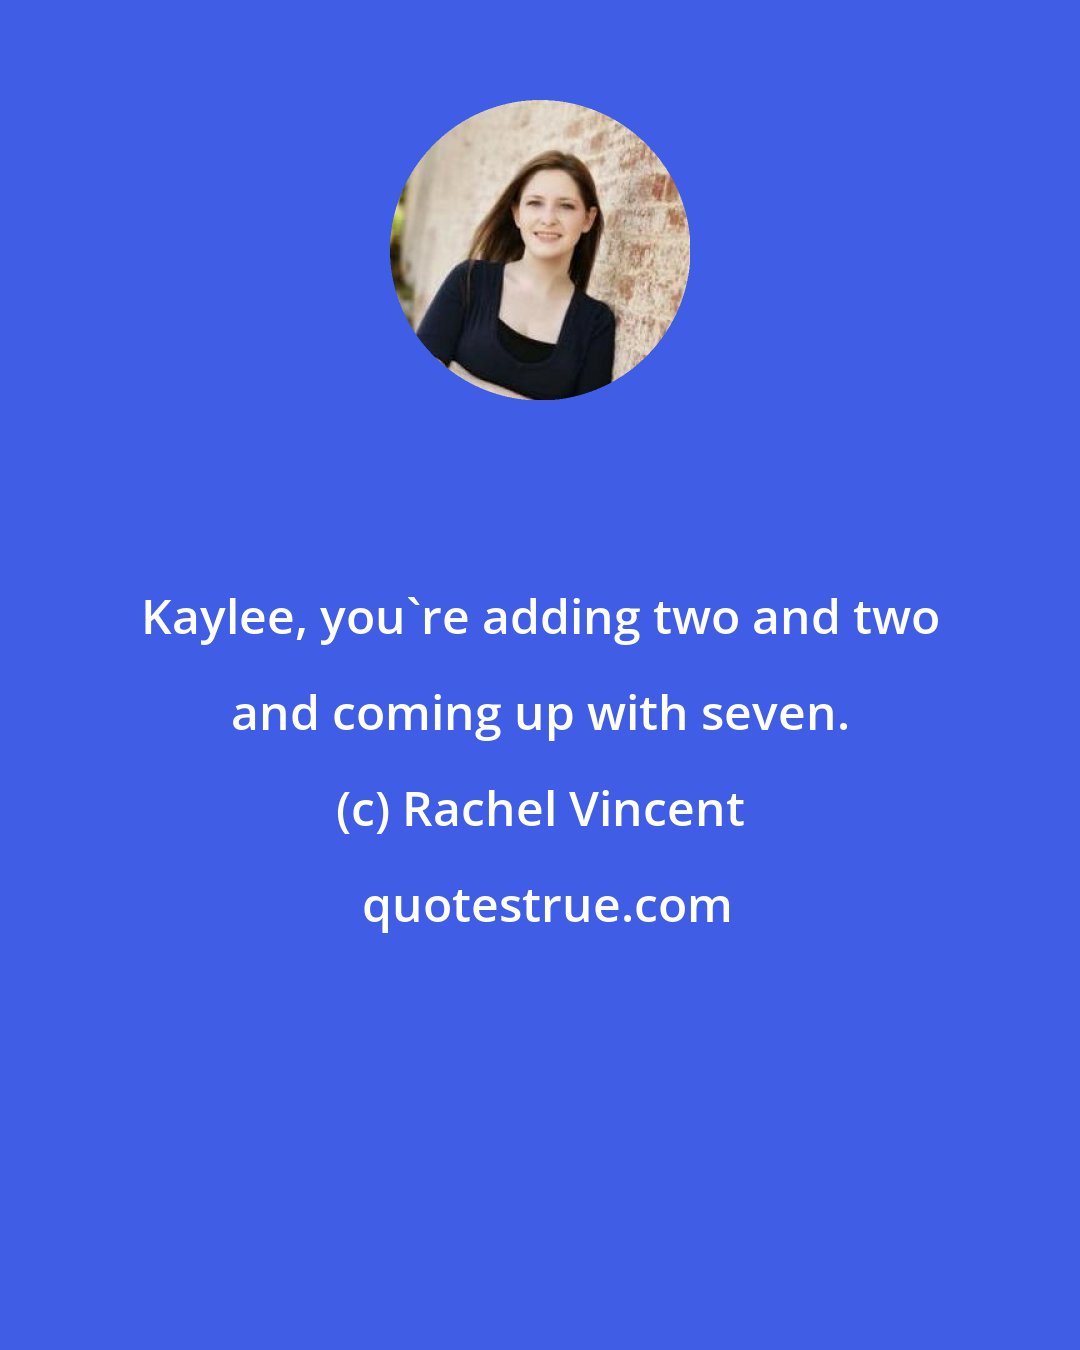 Rachel Vincent: Kaylee, you're adding two and two and coming up with seven.